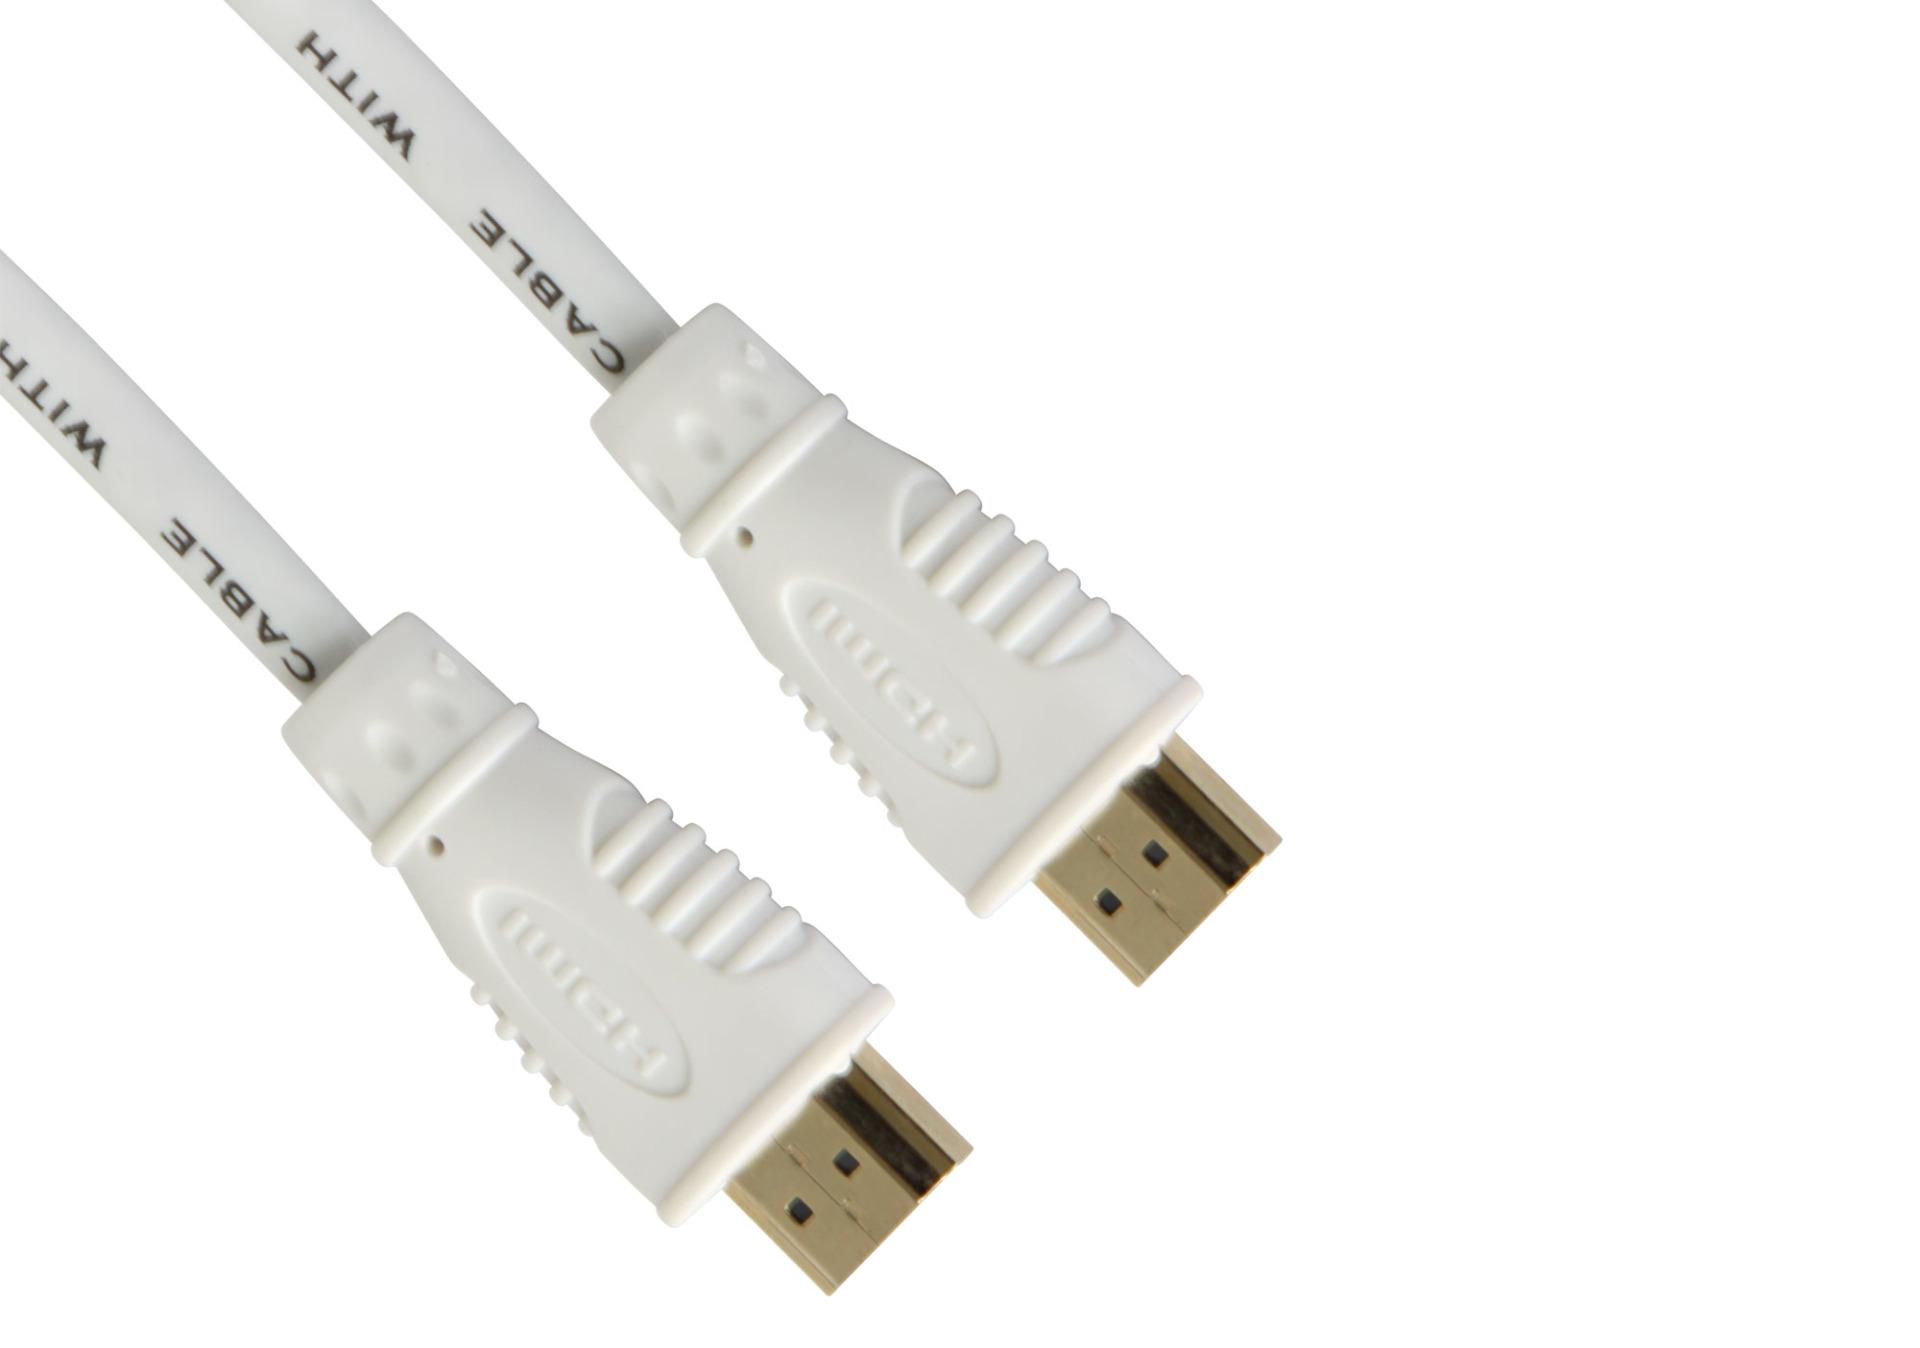 High Speed HDMI Cable with Ethernet, white, 2m